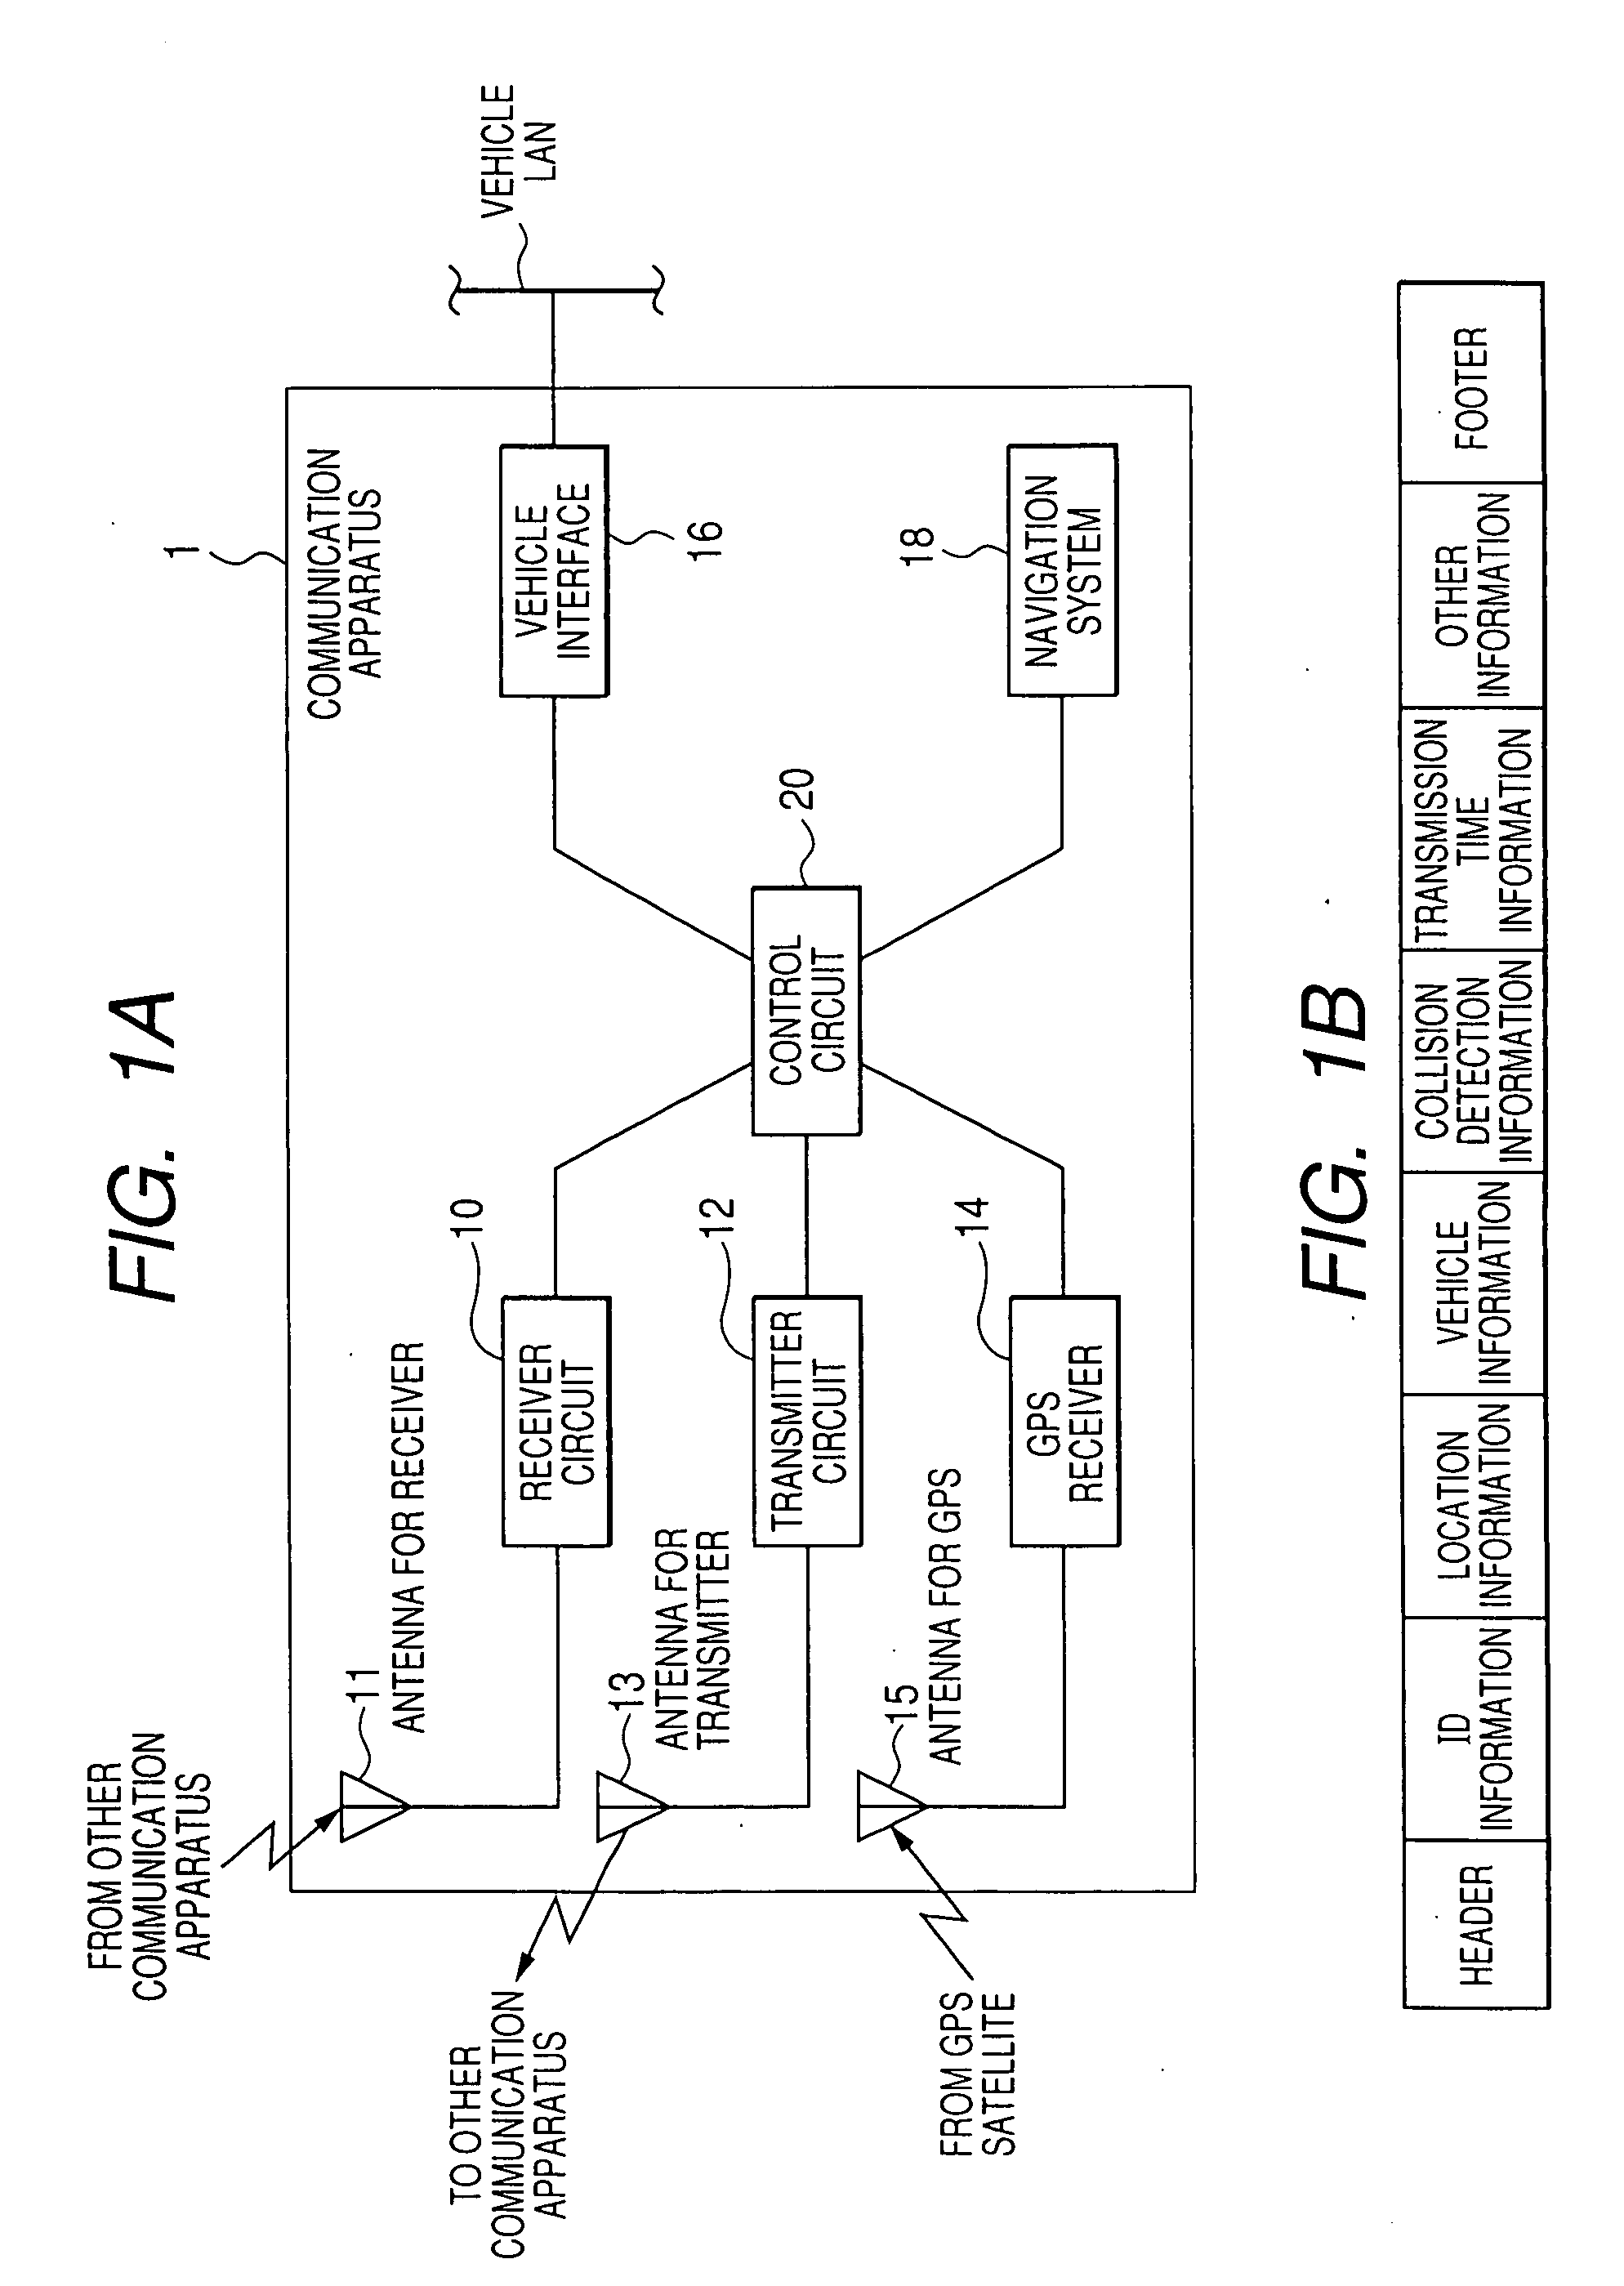 Inter-vehicle communication apparatus and method capable of detecting packet collision